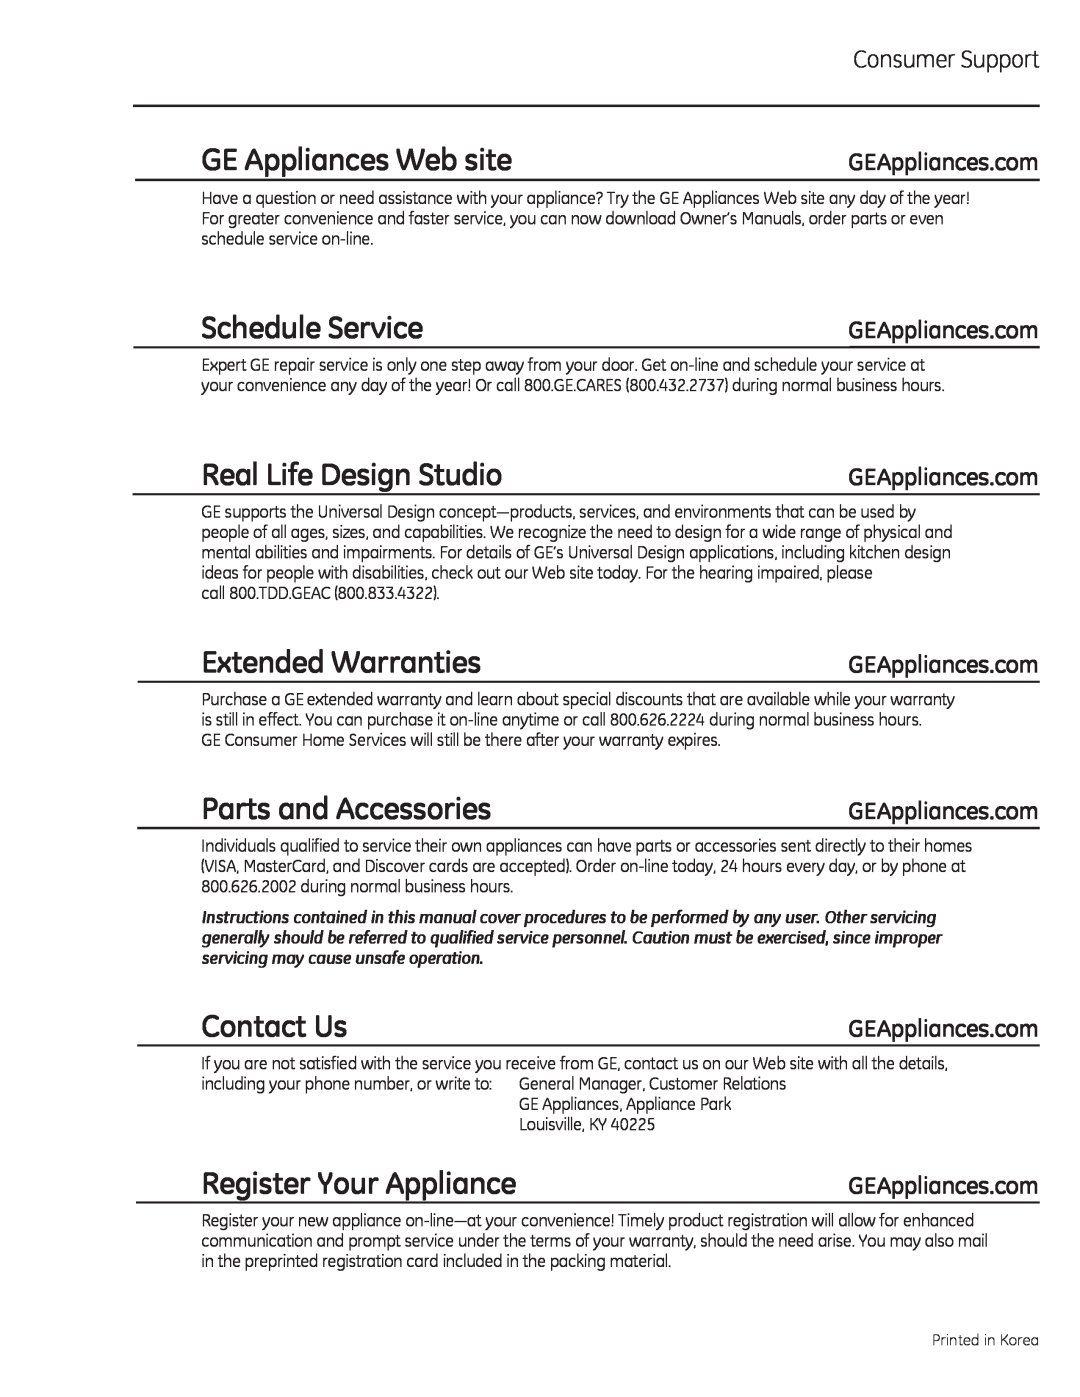 GE PSA1201 GE Appliances Web site, Schedule Service, Real Life Design Studio, Extended Warranties, Parts and Accessories 